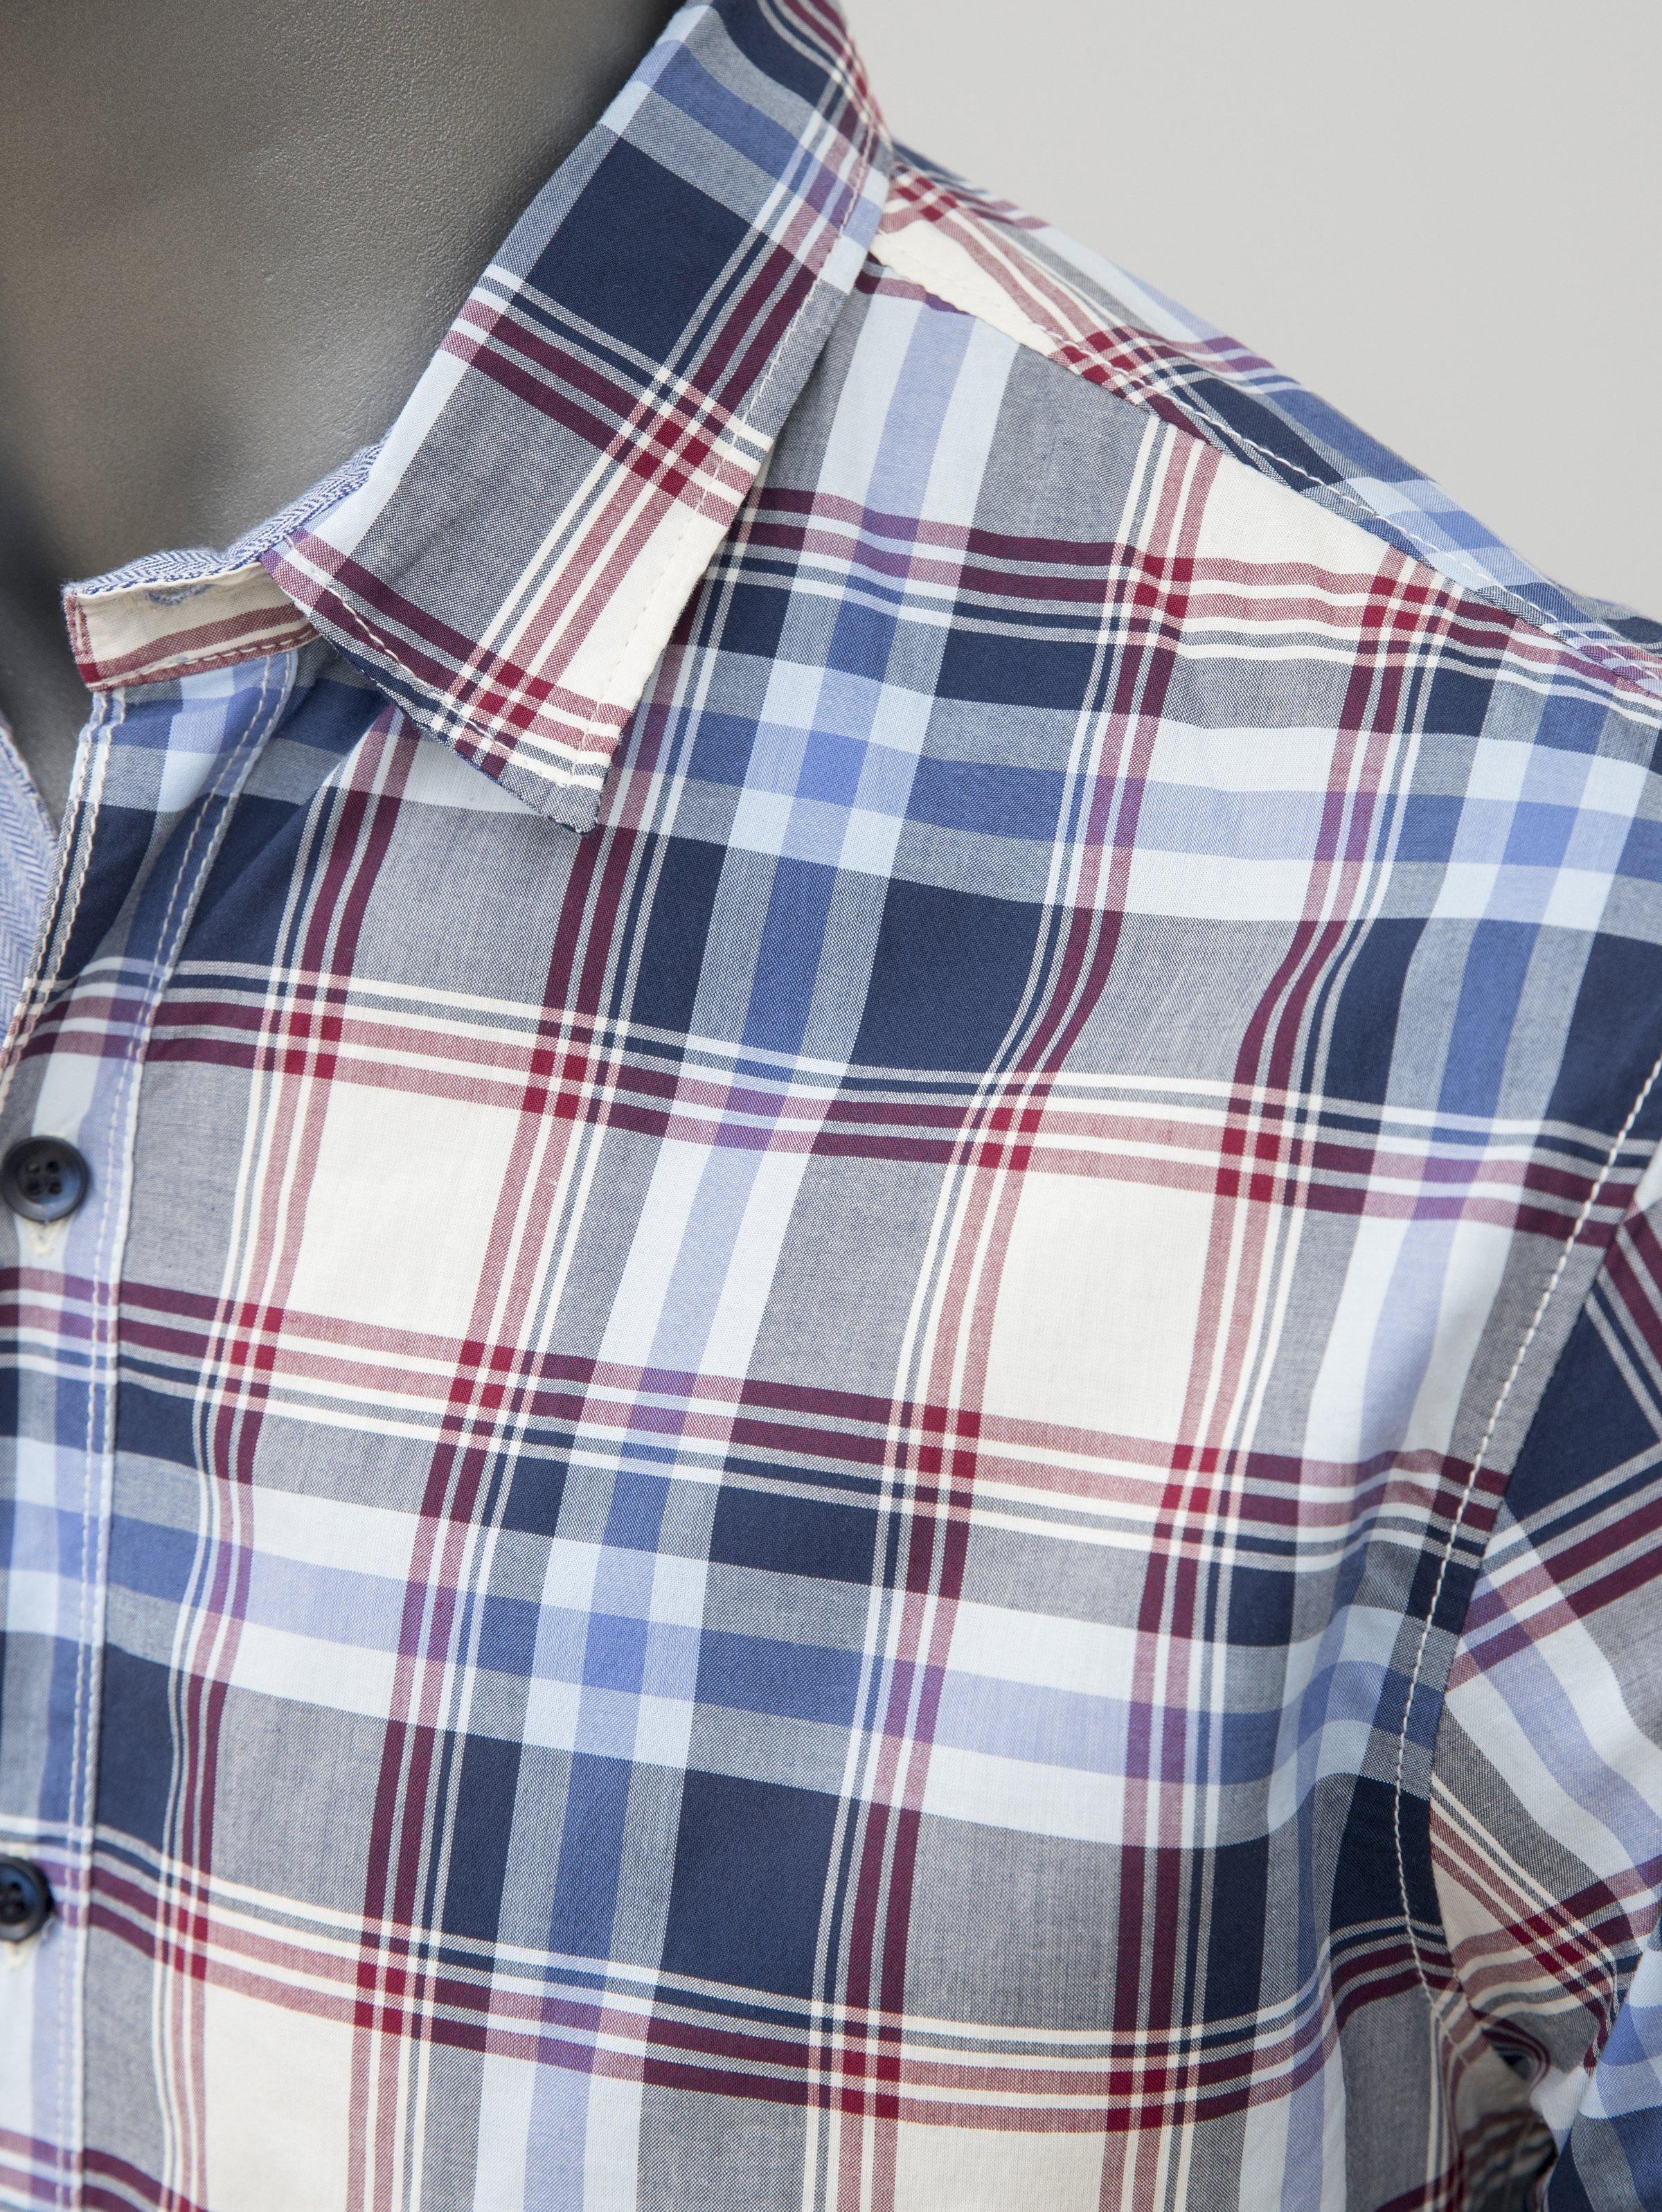 Casual Shirt Full Sleeves Multi Color Check at Charcoal Clothing